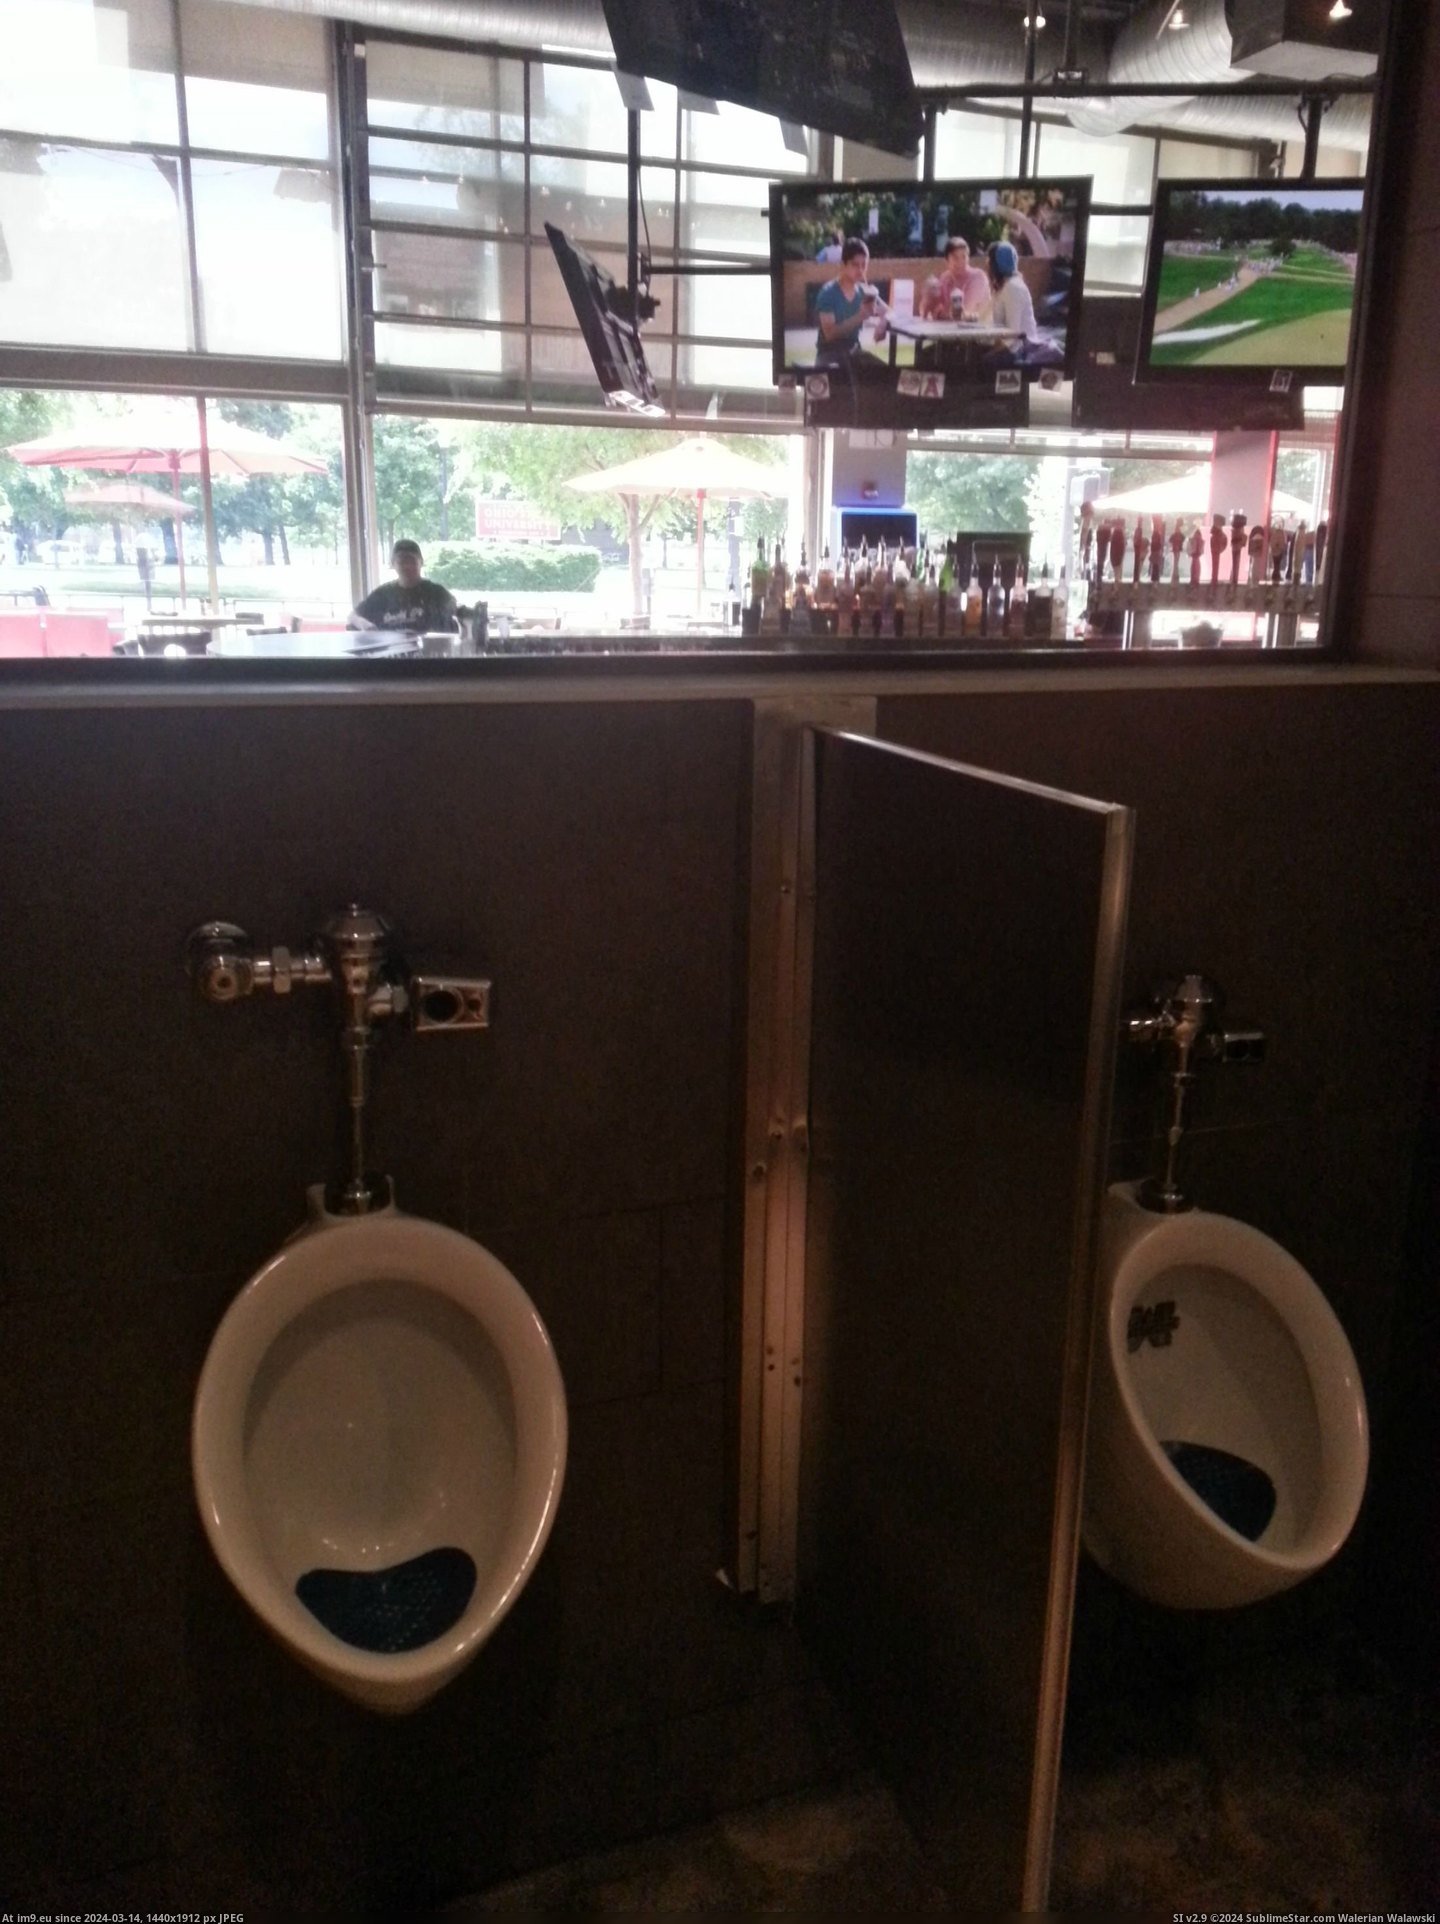 #One #You #Game #Bar #Sports #Bathrooms #Way #Glass #Any [Mildlyinteresting] This sports bar has one way glass in the bathrooms so you don't miss any of the game Pic. (Bild von album My r/MILDLYINTERESTING favs))